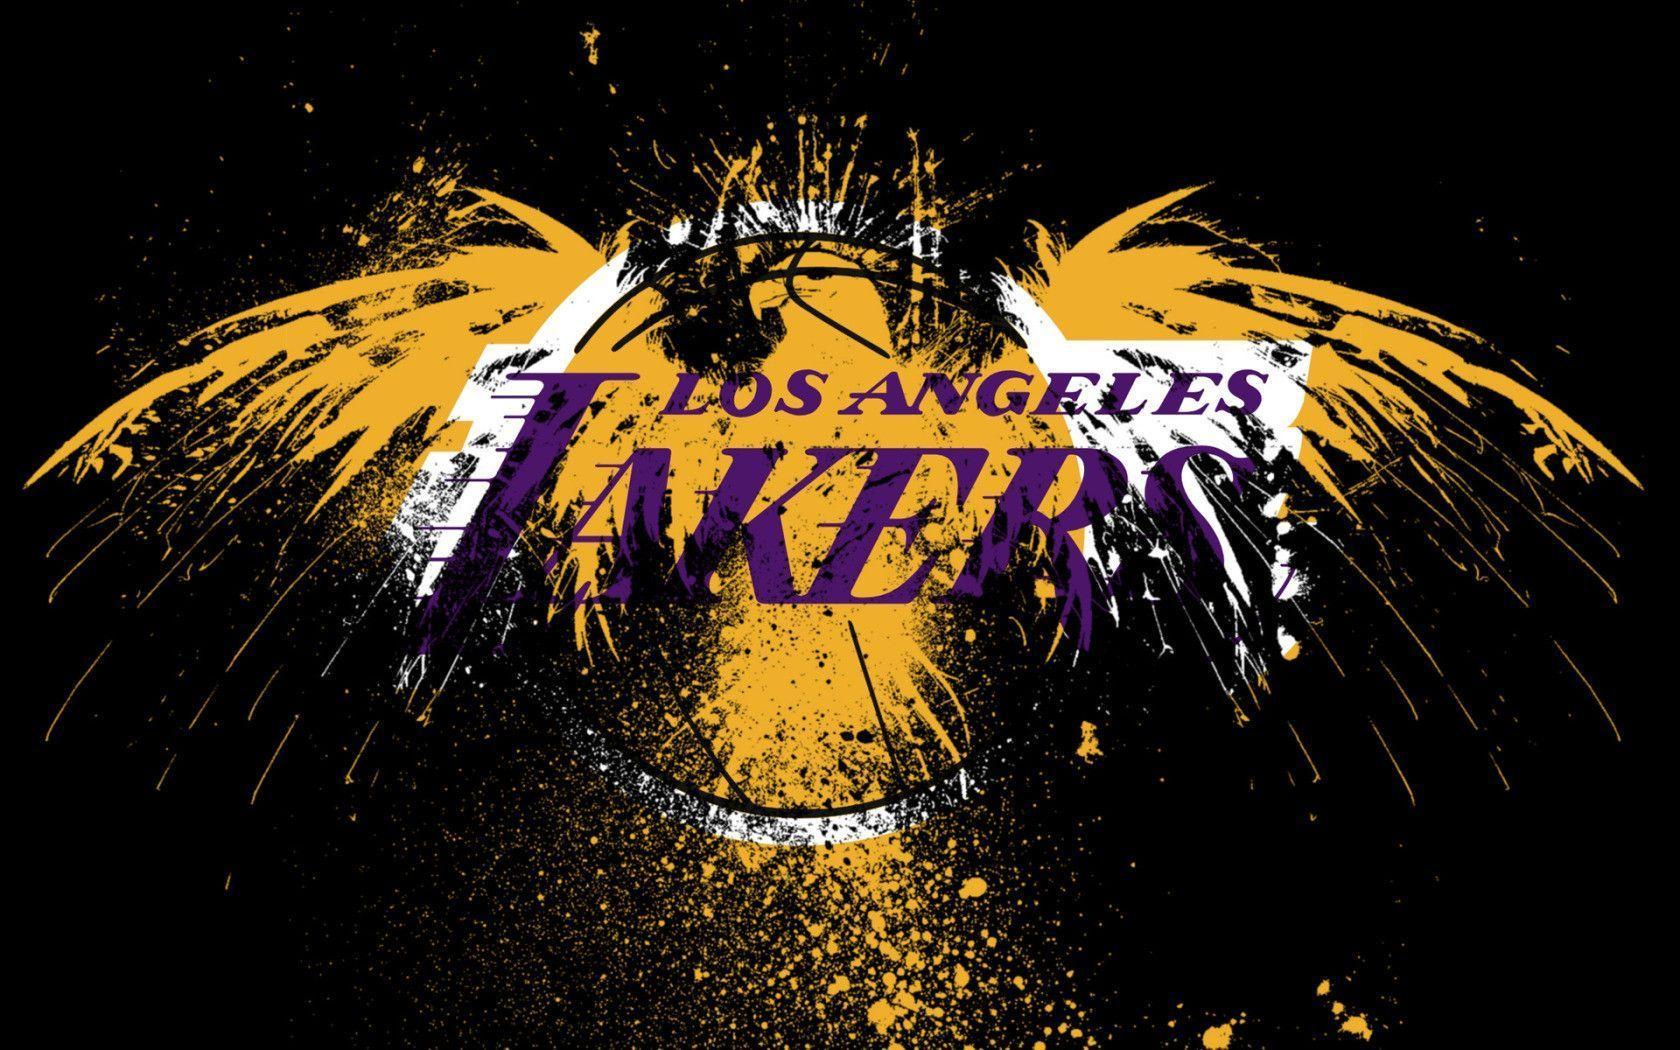 Enjoy this new Los Angeles lakers desktop backgrounds